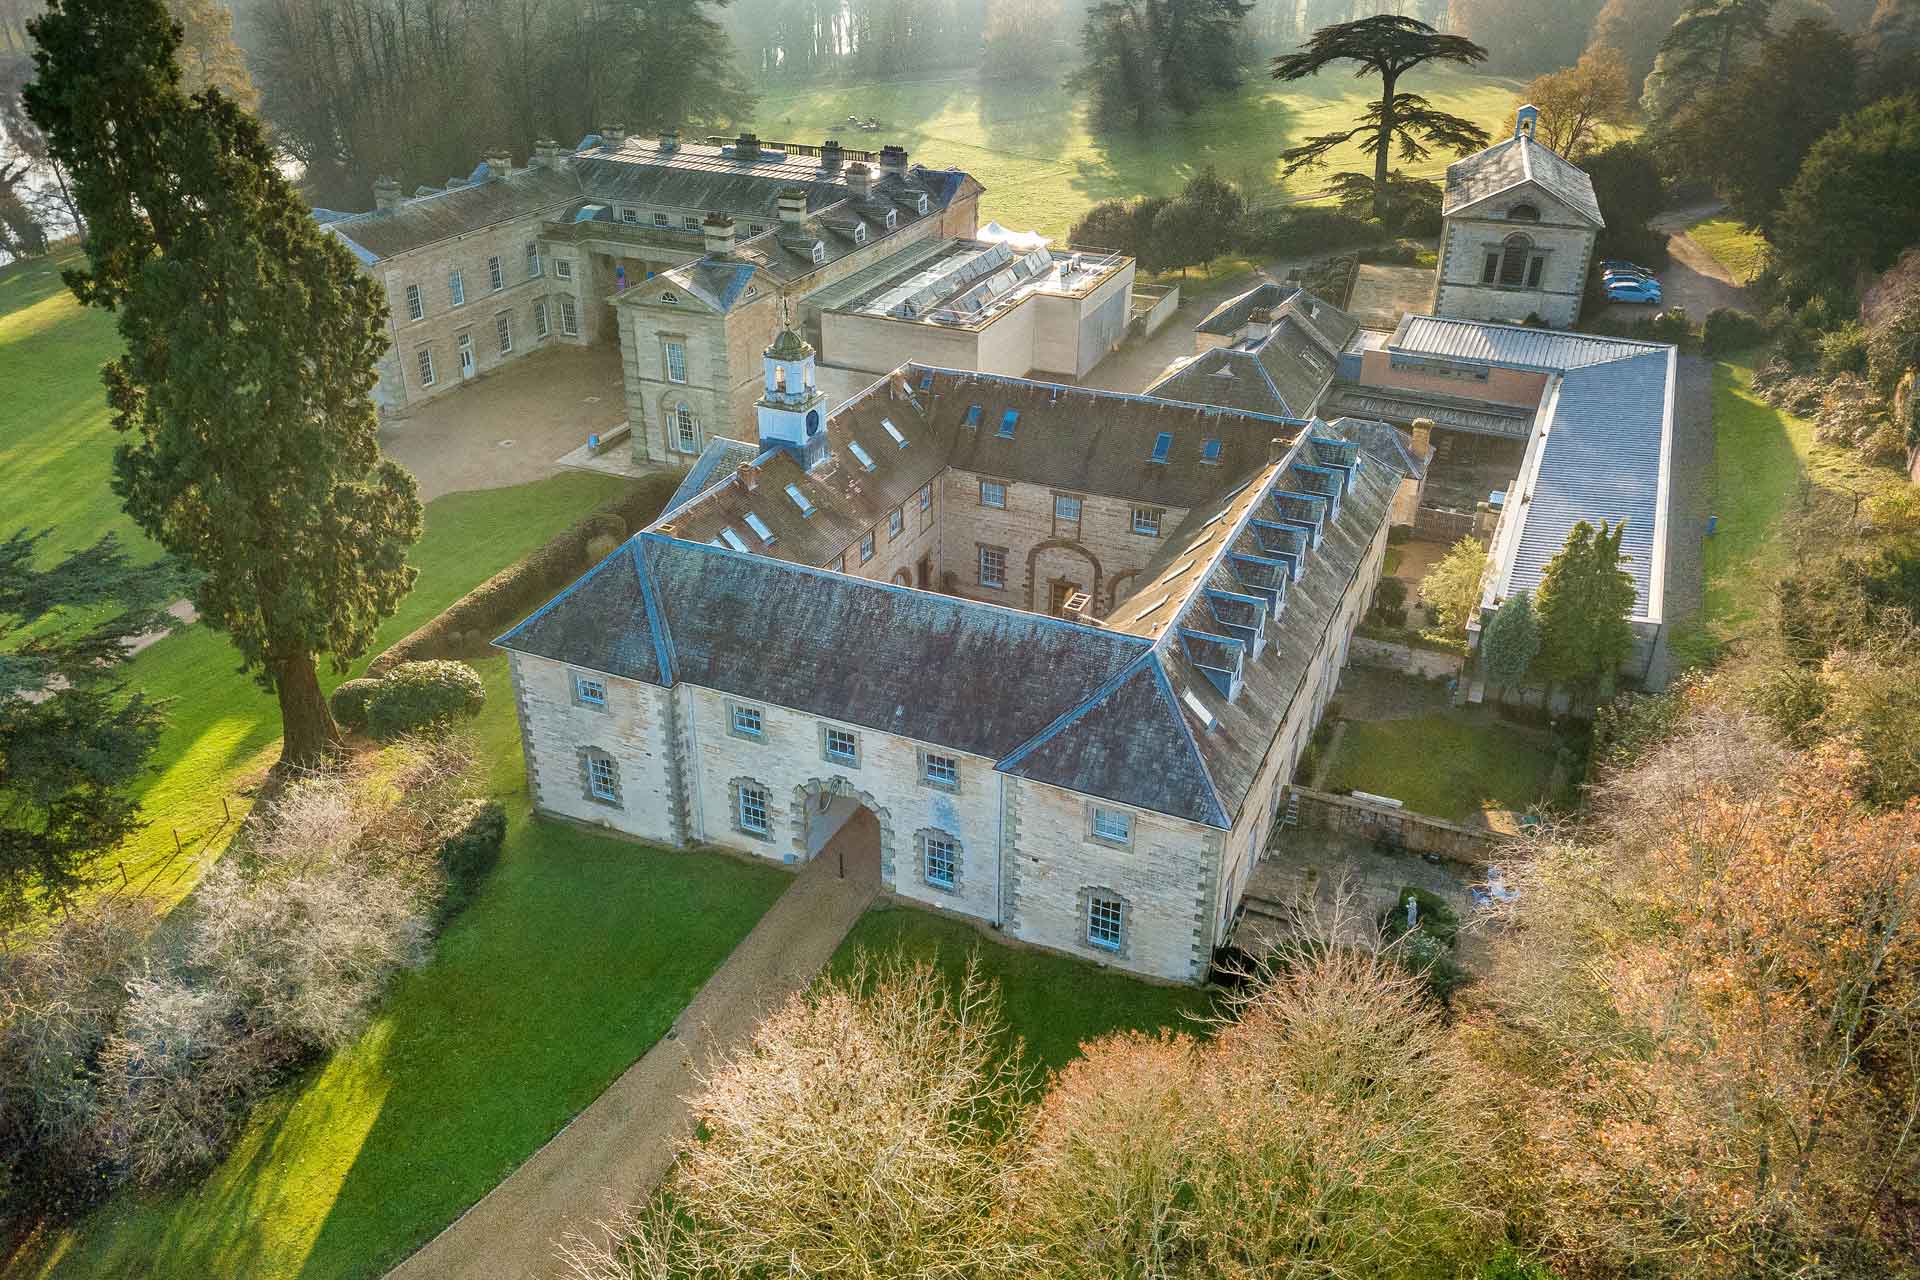 Aerial view of 1 The Coach House at Compton Verney: a square building with a central courtyard.